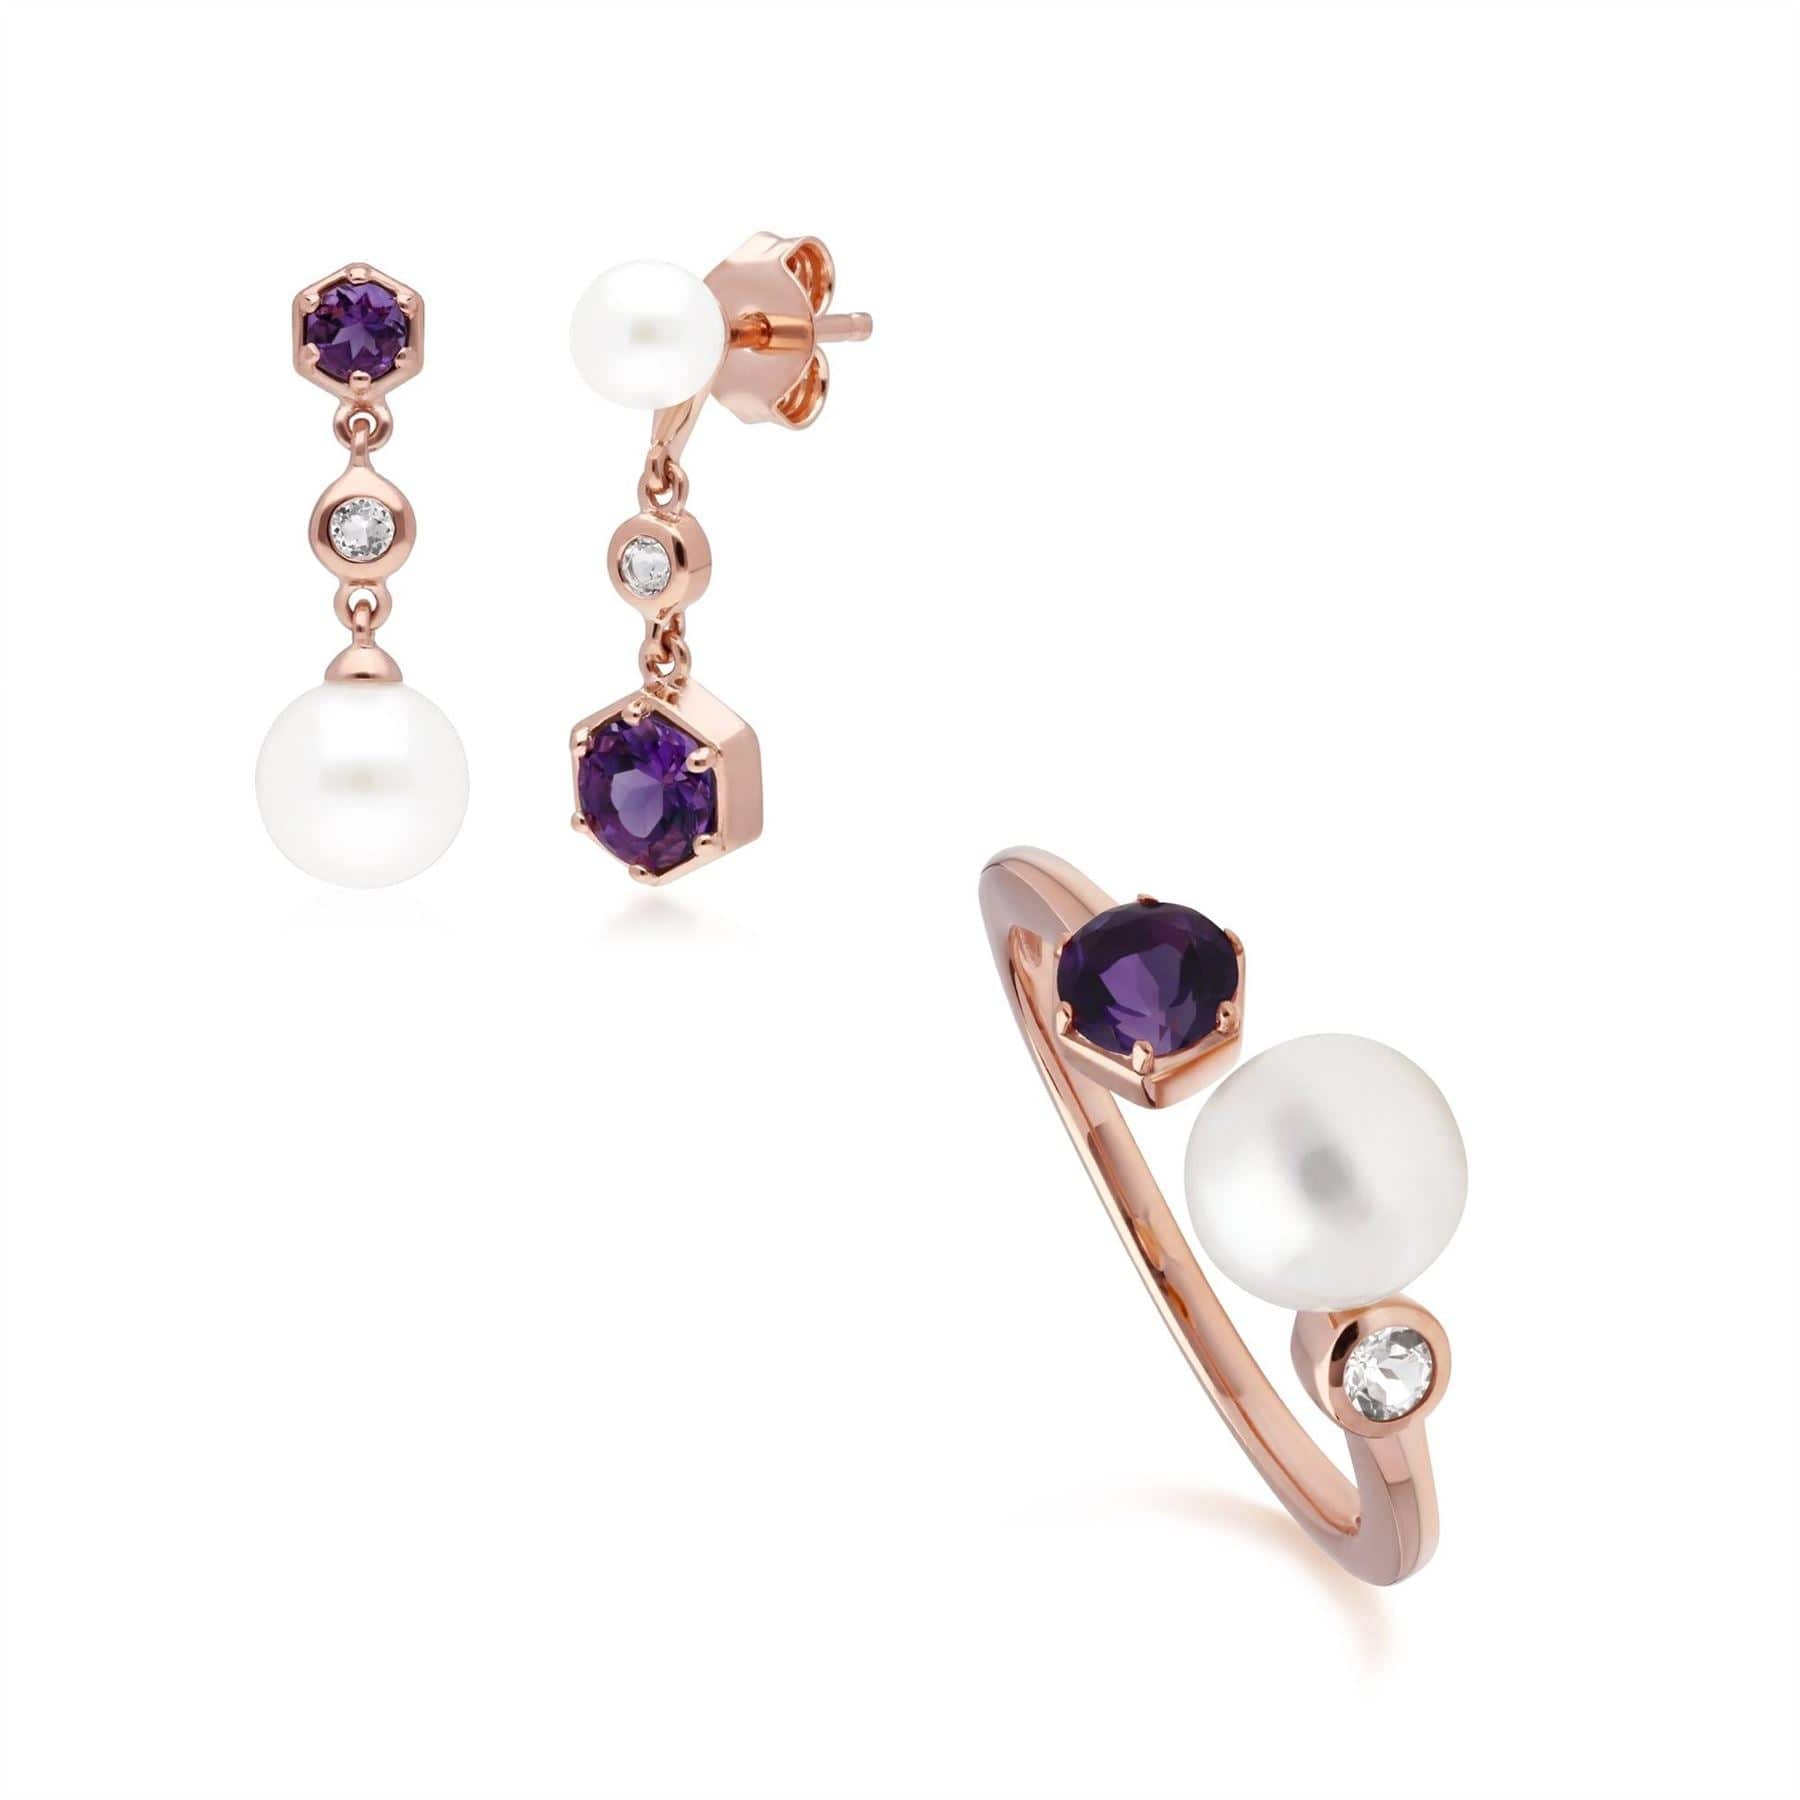 270E030304925-270R058804925 Modern Pearl, Amethyst & Topaz Earring & Ring Set in Rose Gold Plated Silver 1